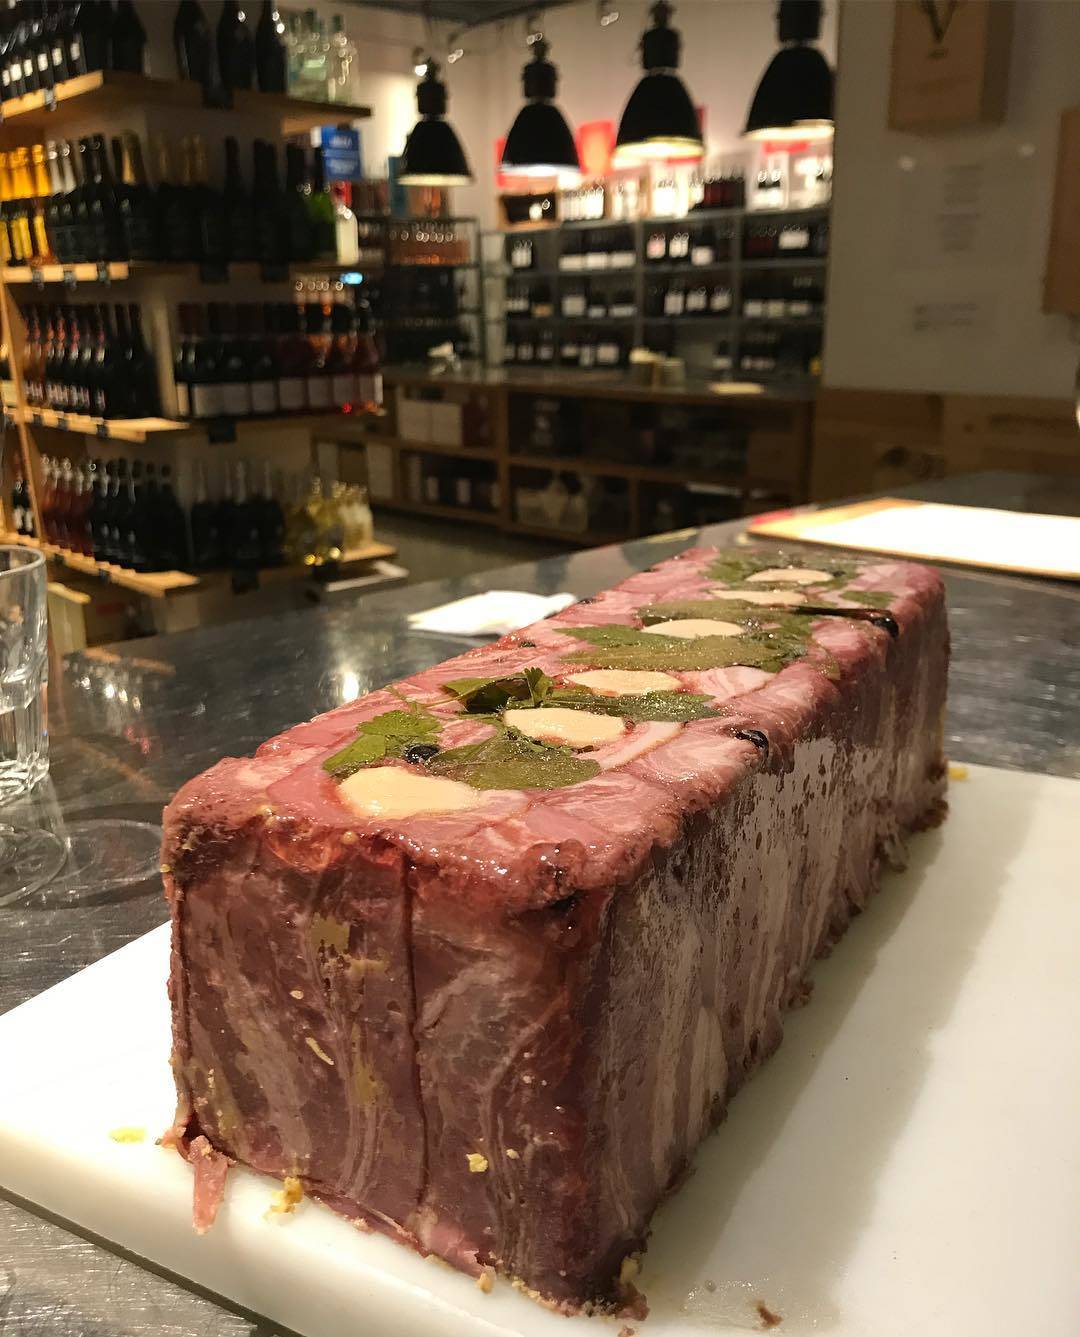 🚨PÂTÉ ALERT🚨this new beaut will be served on Friday! Country style pate with Foie Gras! 👀 This will be our last Friday for two weeks! Next Friday we’re open will be the 16th of February!